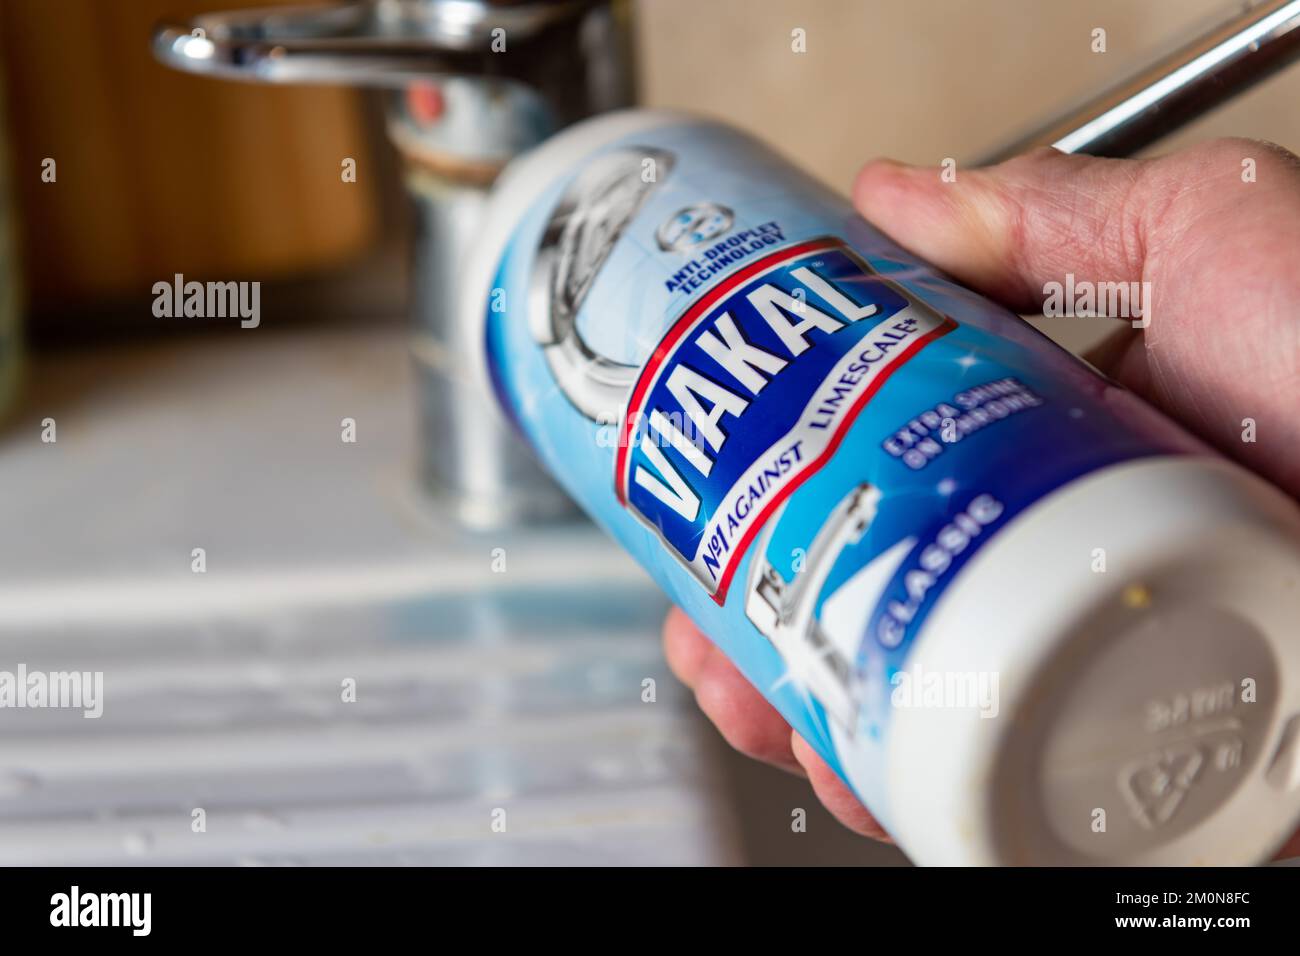 London. UK- 12.07.2022. A person applying Viakal limescale remover to a kitchen sink water tap. Stock Photo